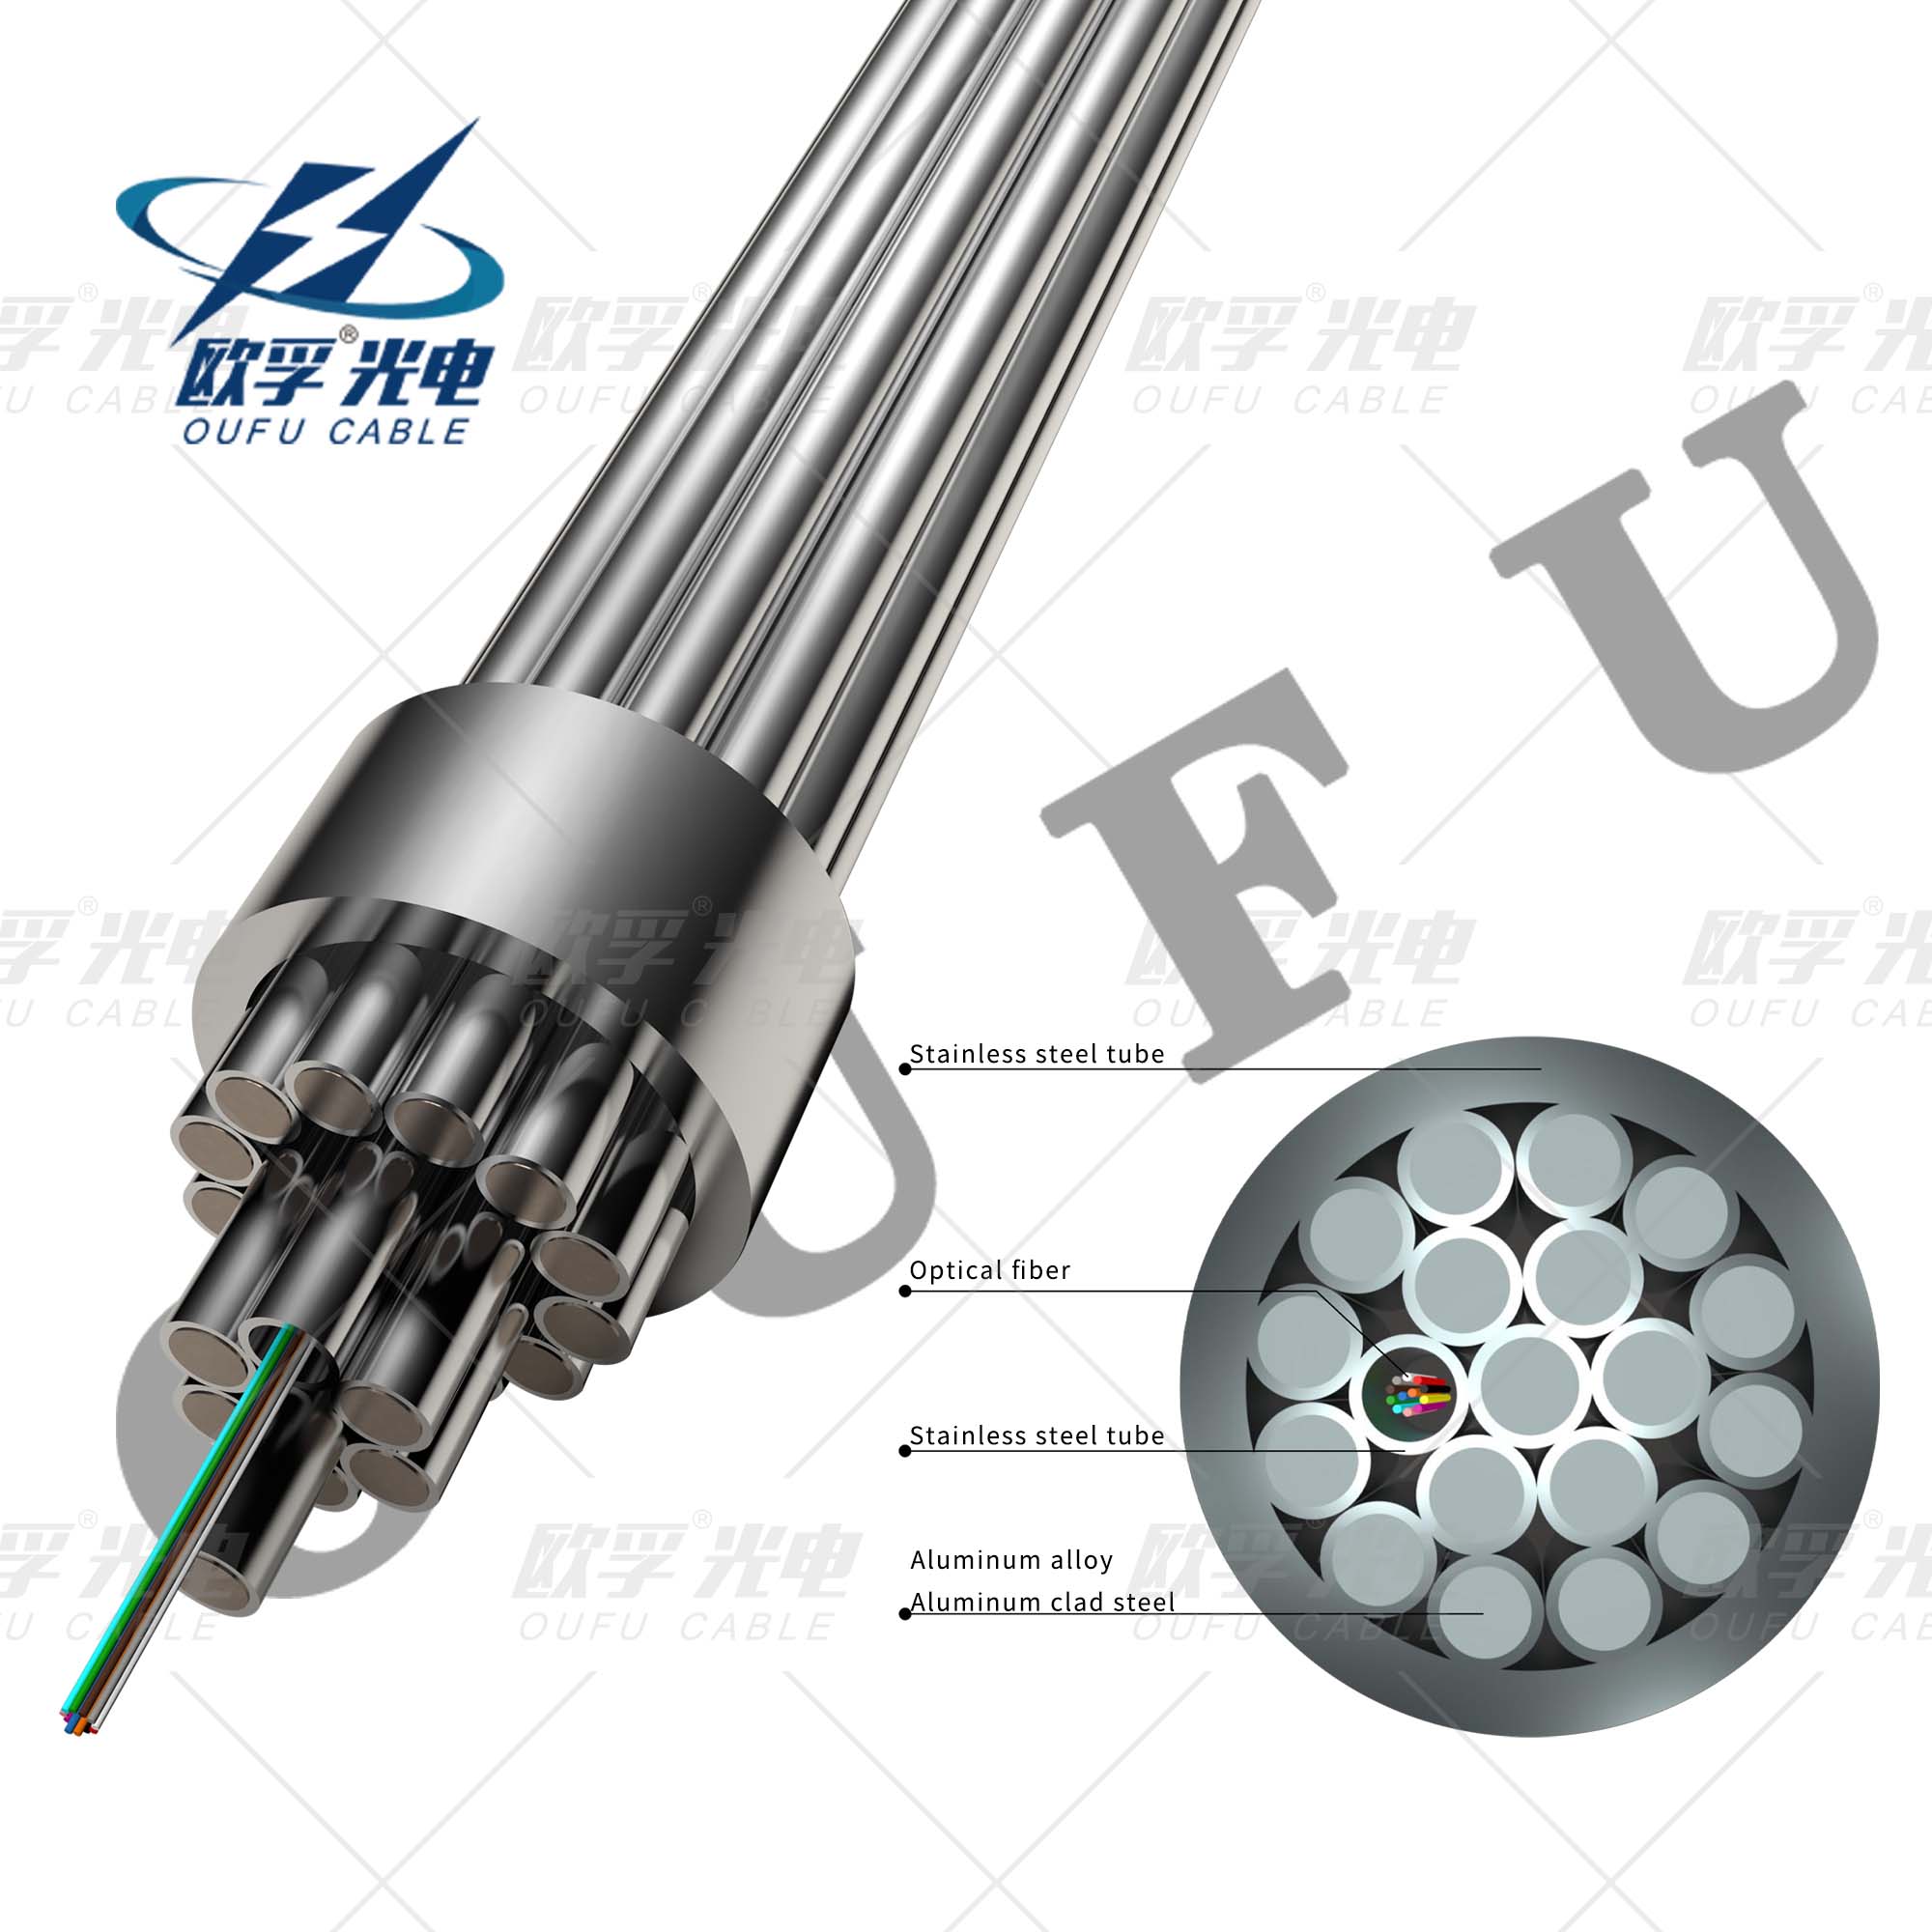 OPGW Stainless steel stranded wire